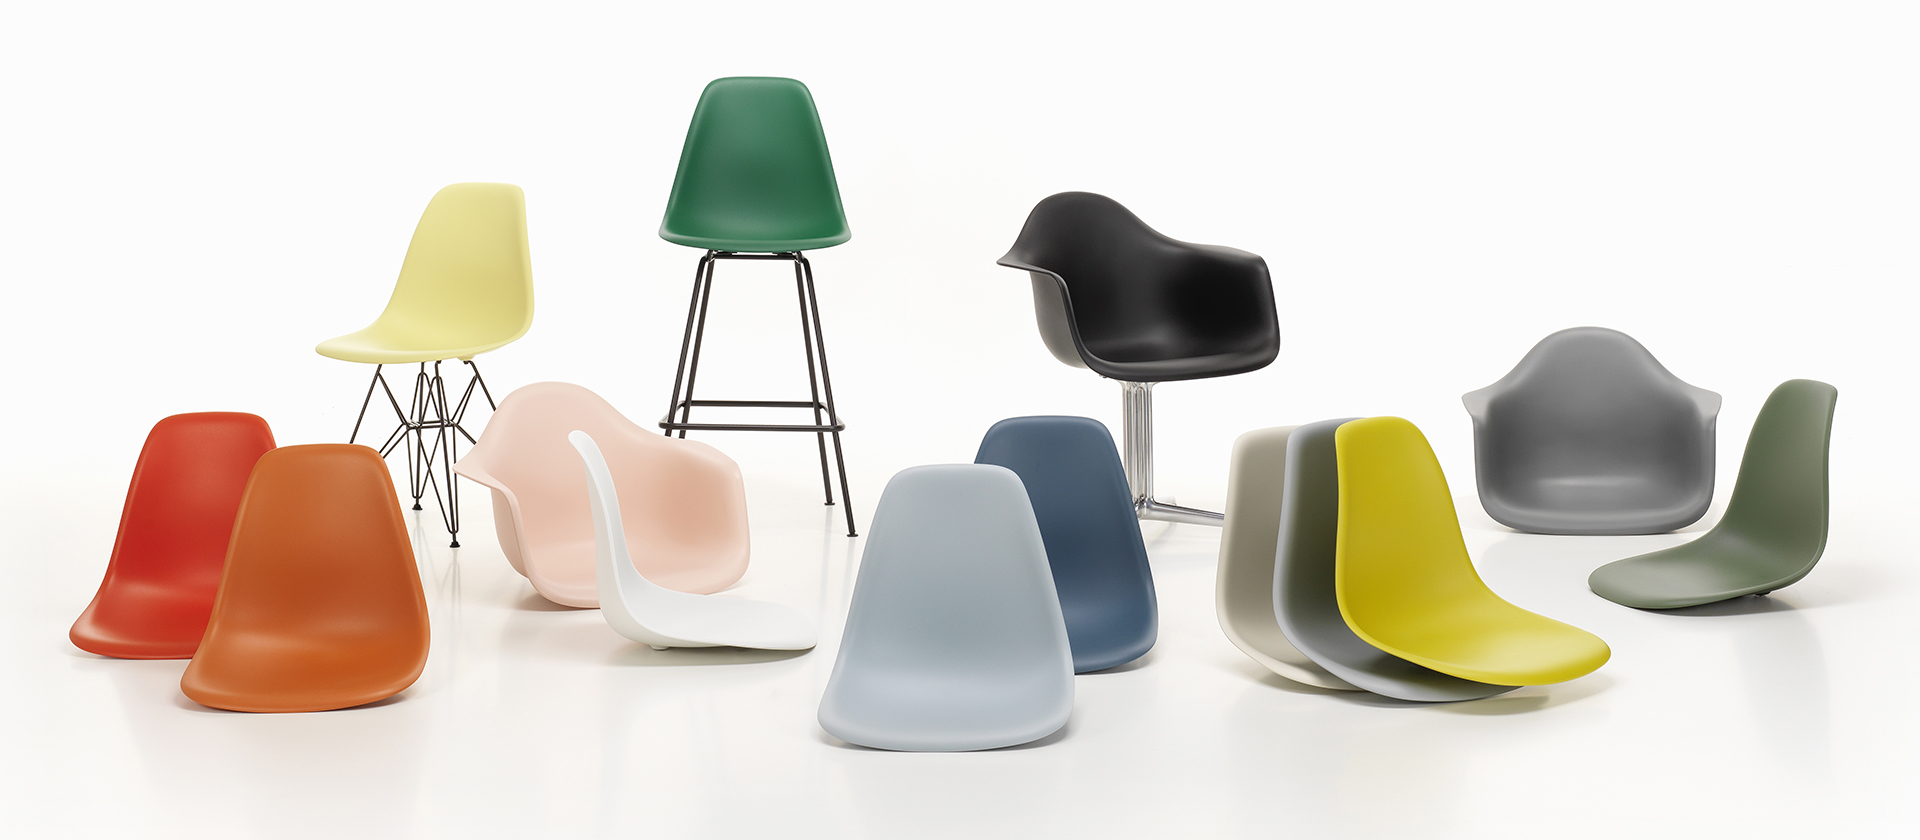 8738091_Eames_Plastic_Chair_Group_master